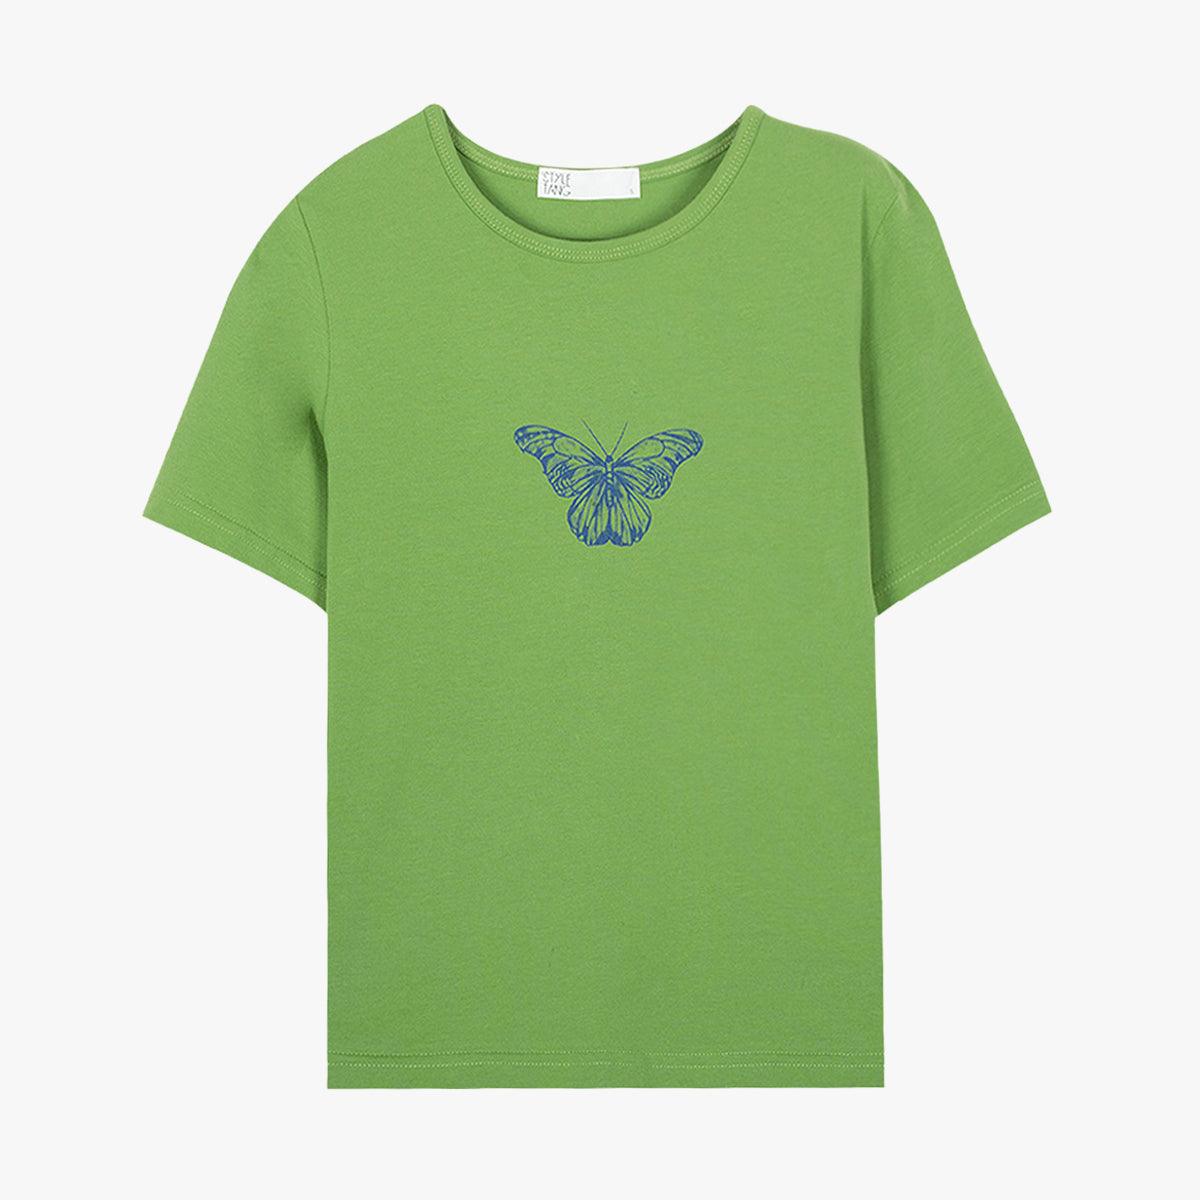 Indie Green Butterfly T-Shirt • Aesthetic Clothes Shop